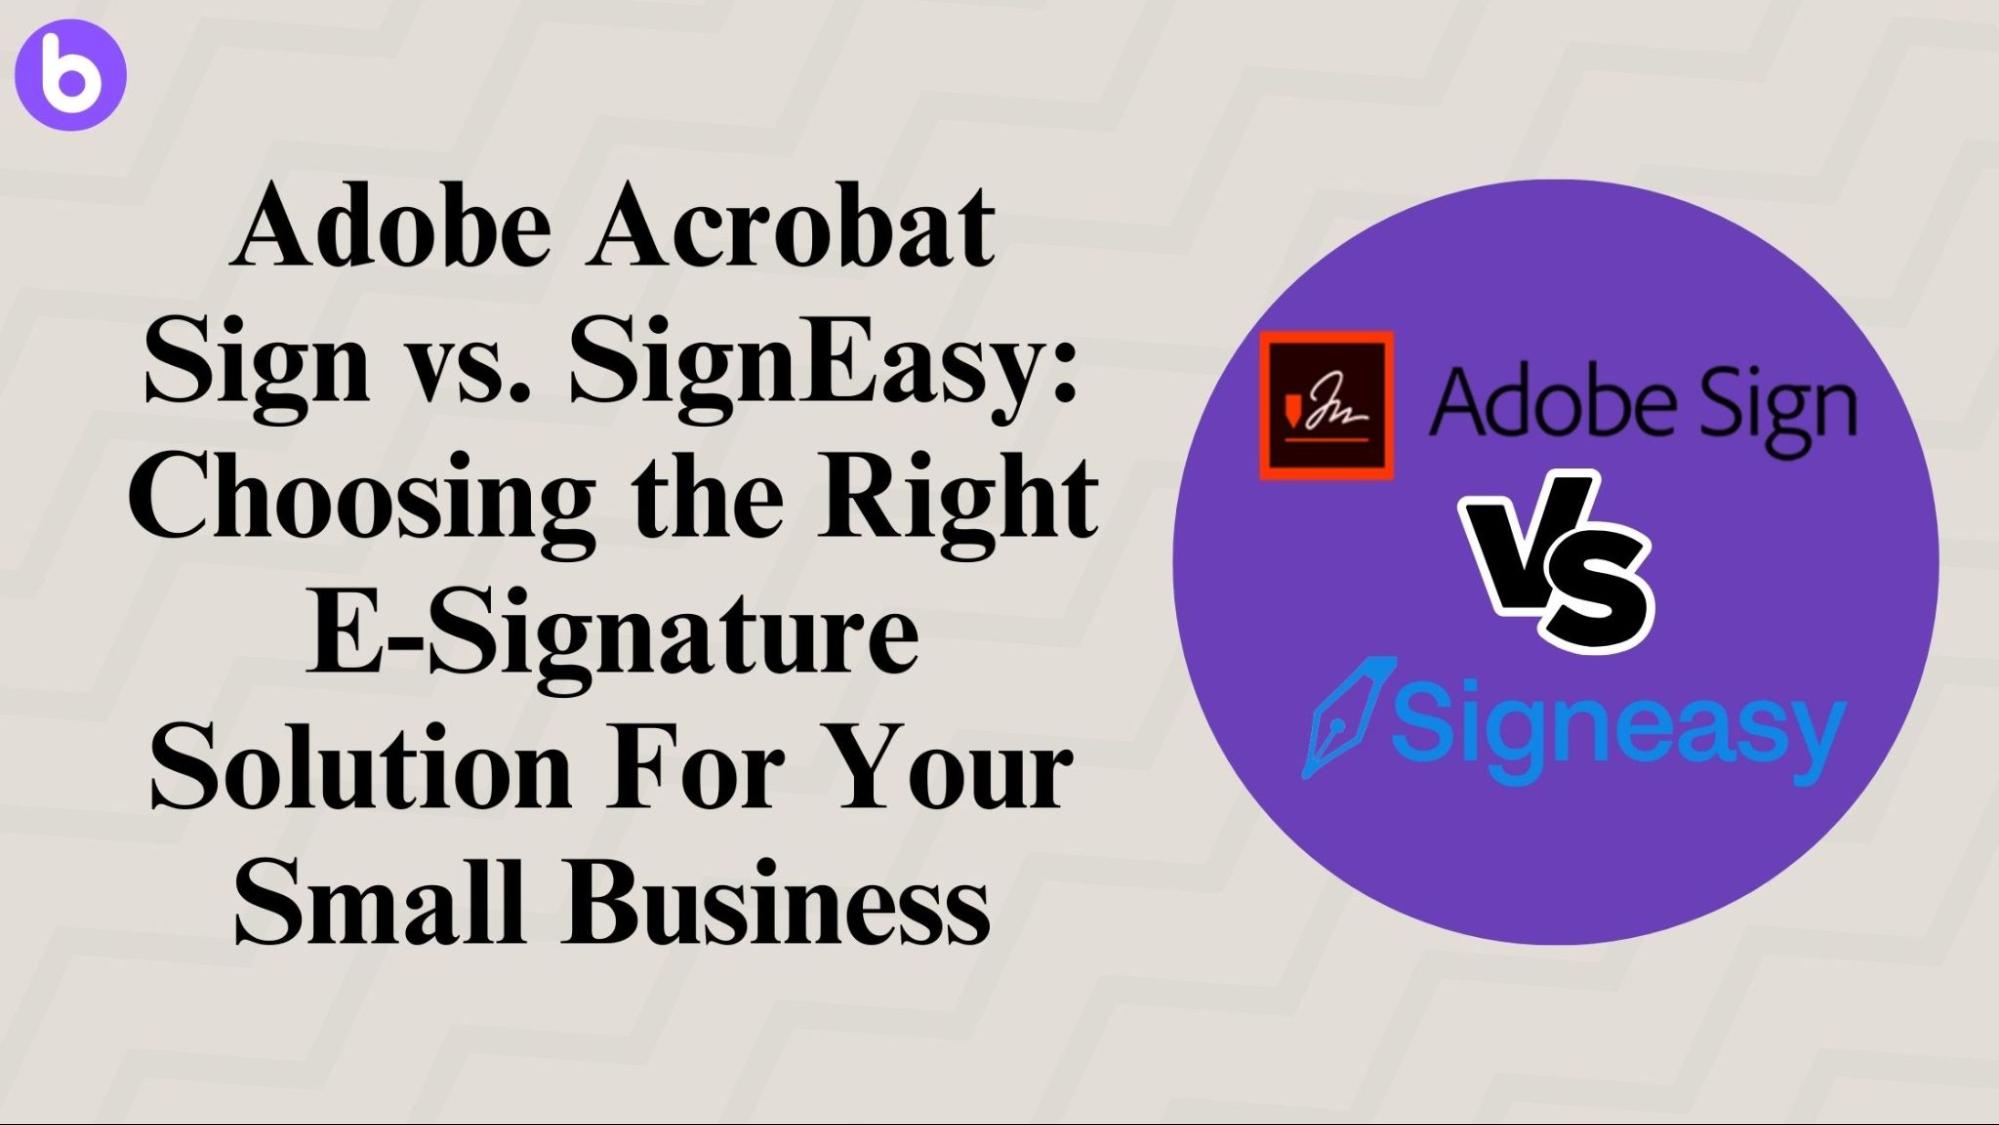 Adobe Acrobat Sign vs. SignEasy: Choosing the Right E-Signature Solution For Your Small Business